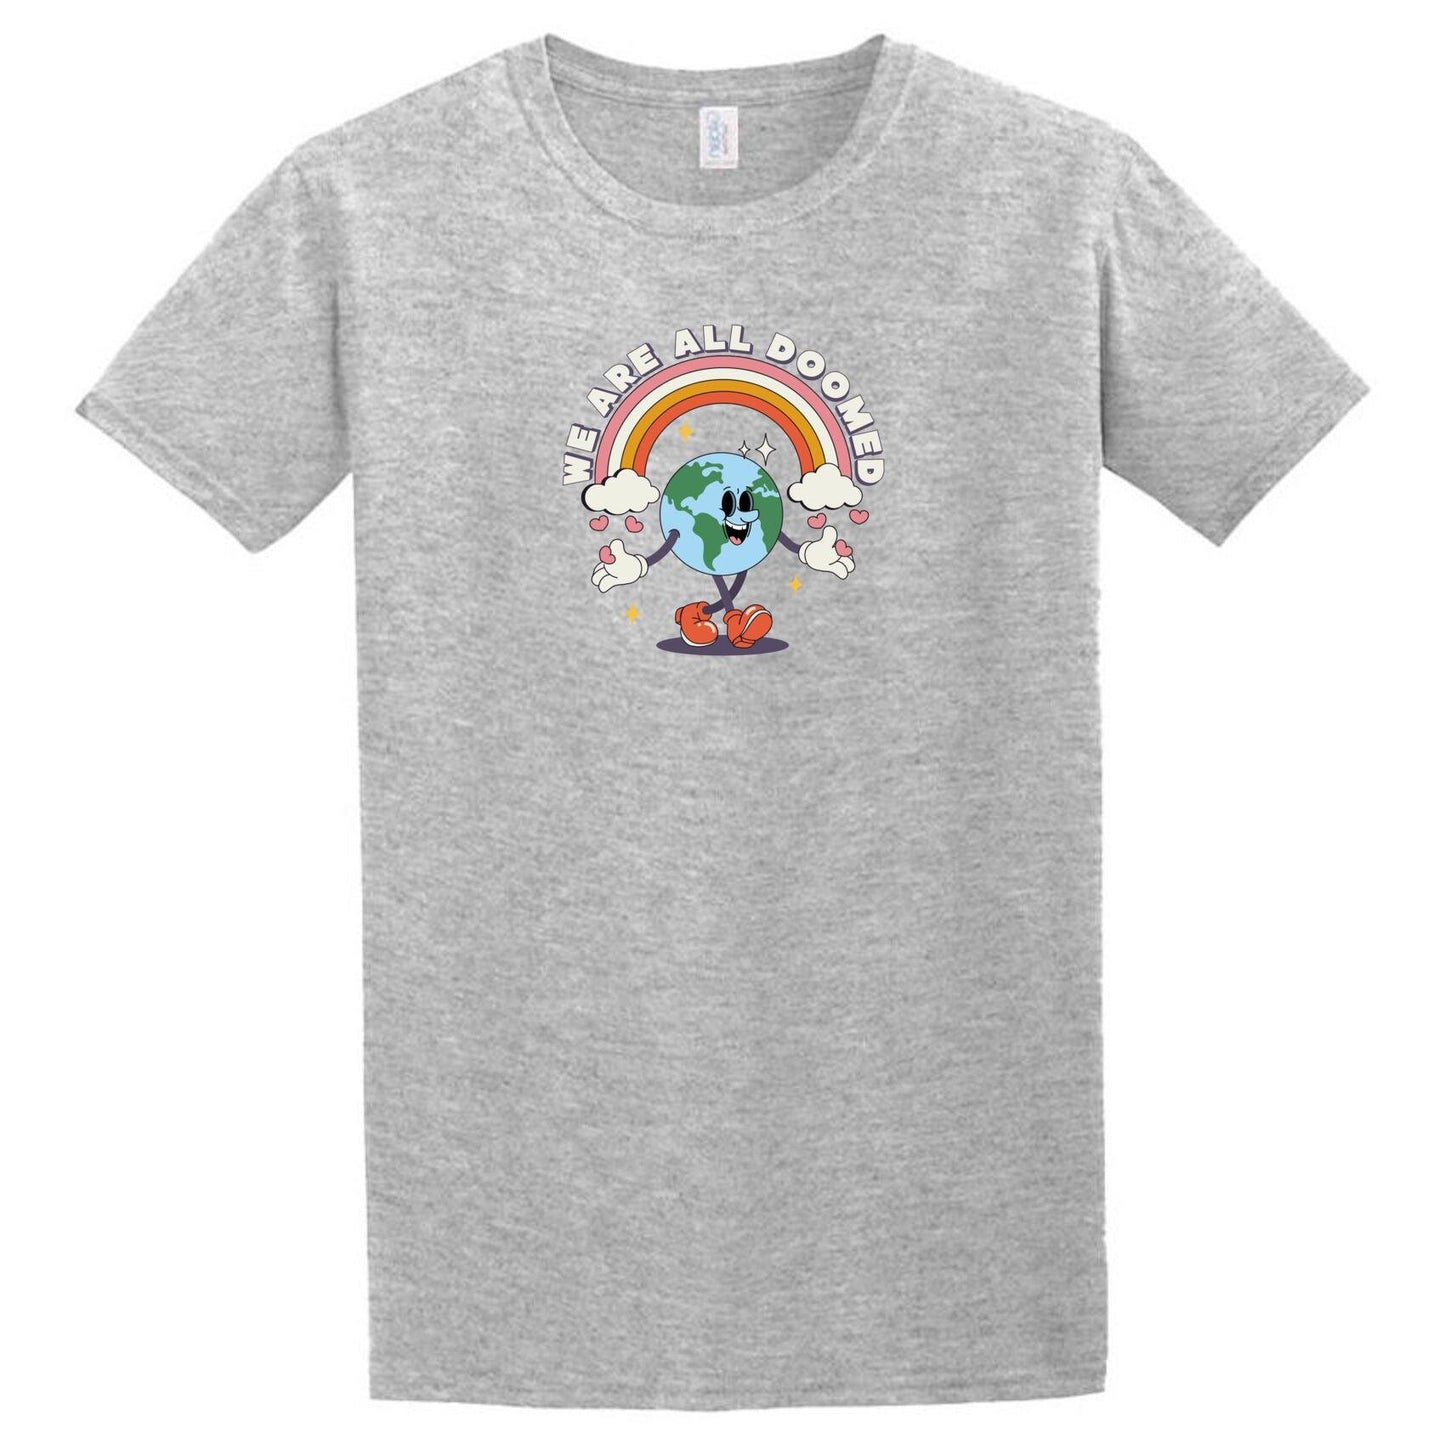 A Doomed T-Shirt with an image of an earth with a rainbow on it by Twisted Gifts.